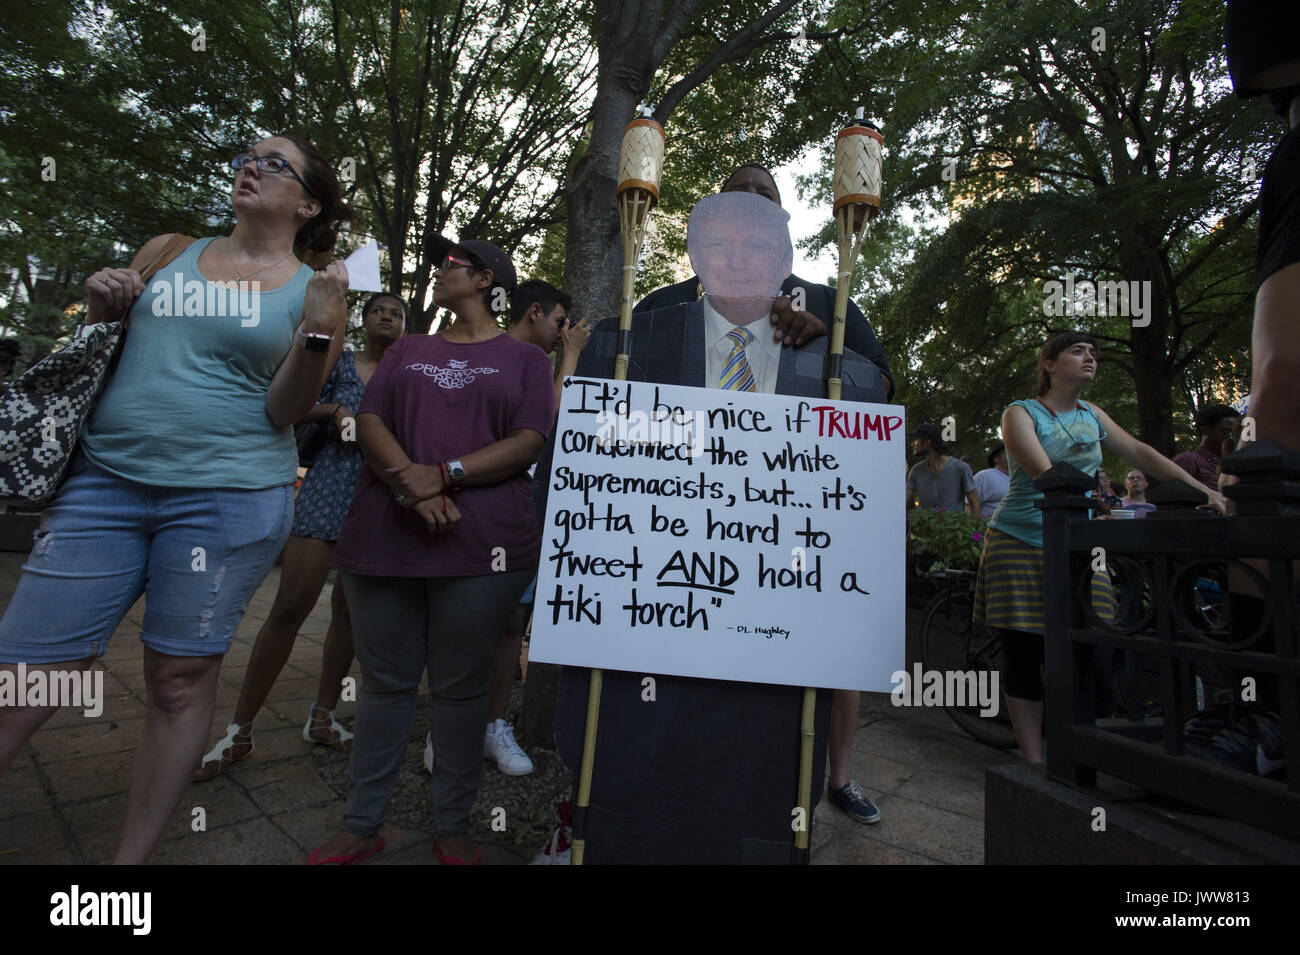 Atlanta, GA, USA. 13th Aug, 2017. Anti-Fascist protestors gather in downtown Atlanta and march along Peachtree Street, showing their support of those who demonstrated against white supremacist group in Charlottesville, VA. Rally organized by Antifa, an organization nationally that fights fascism.Pictured: Credit: Robin Rayne Nelson/ZUMA Wire/Alamy Live News Stock Photo